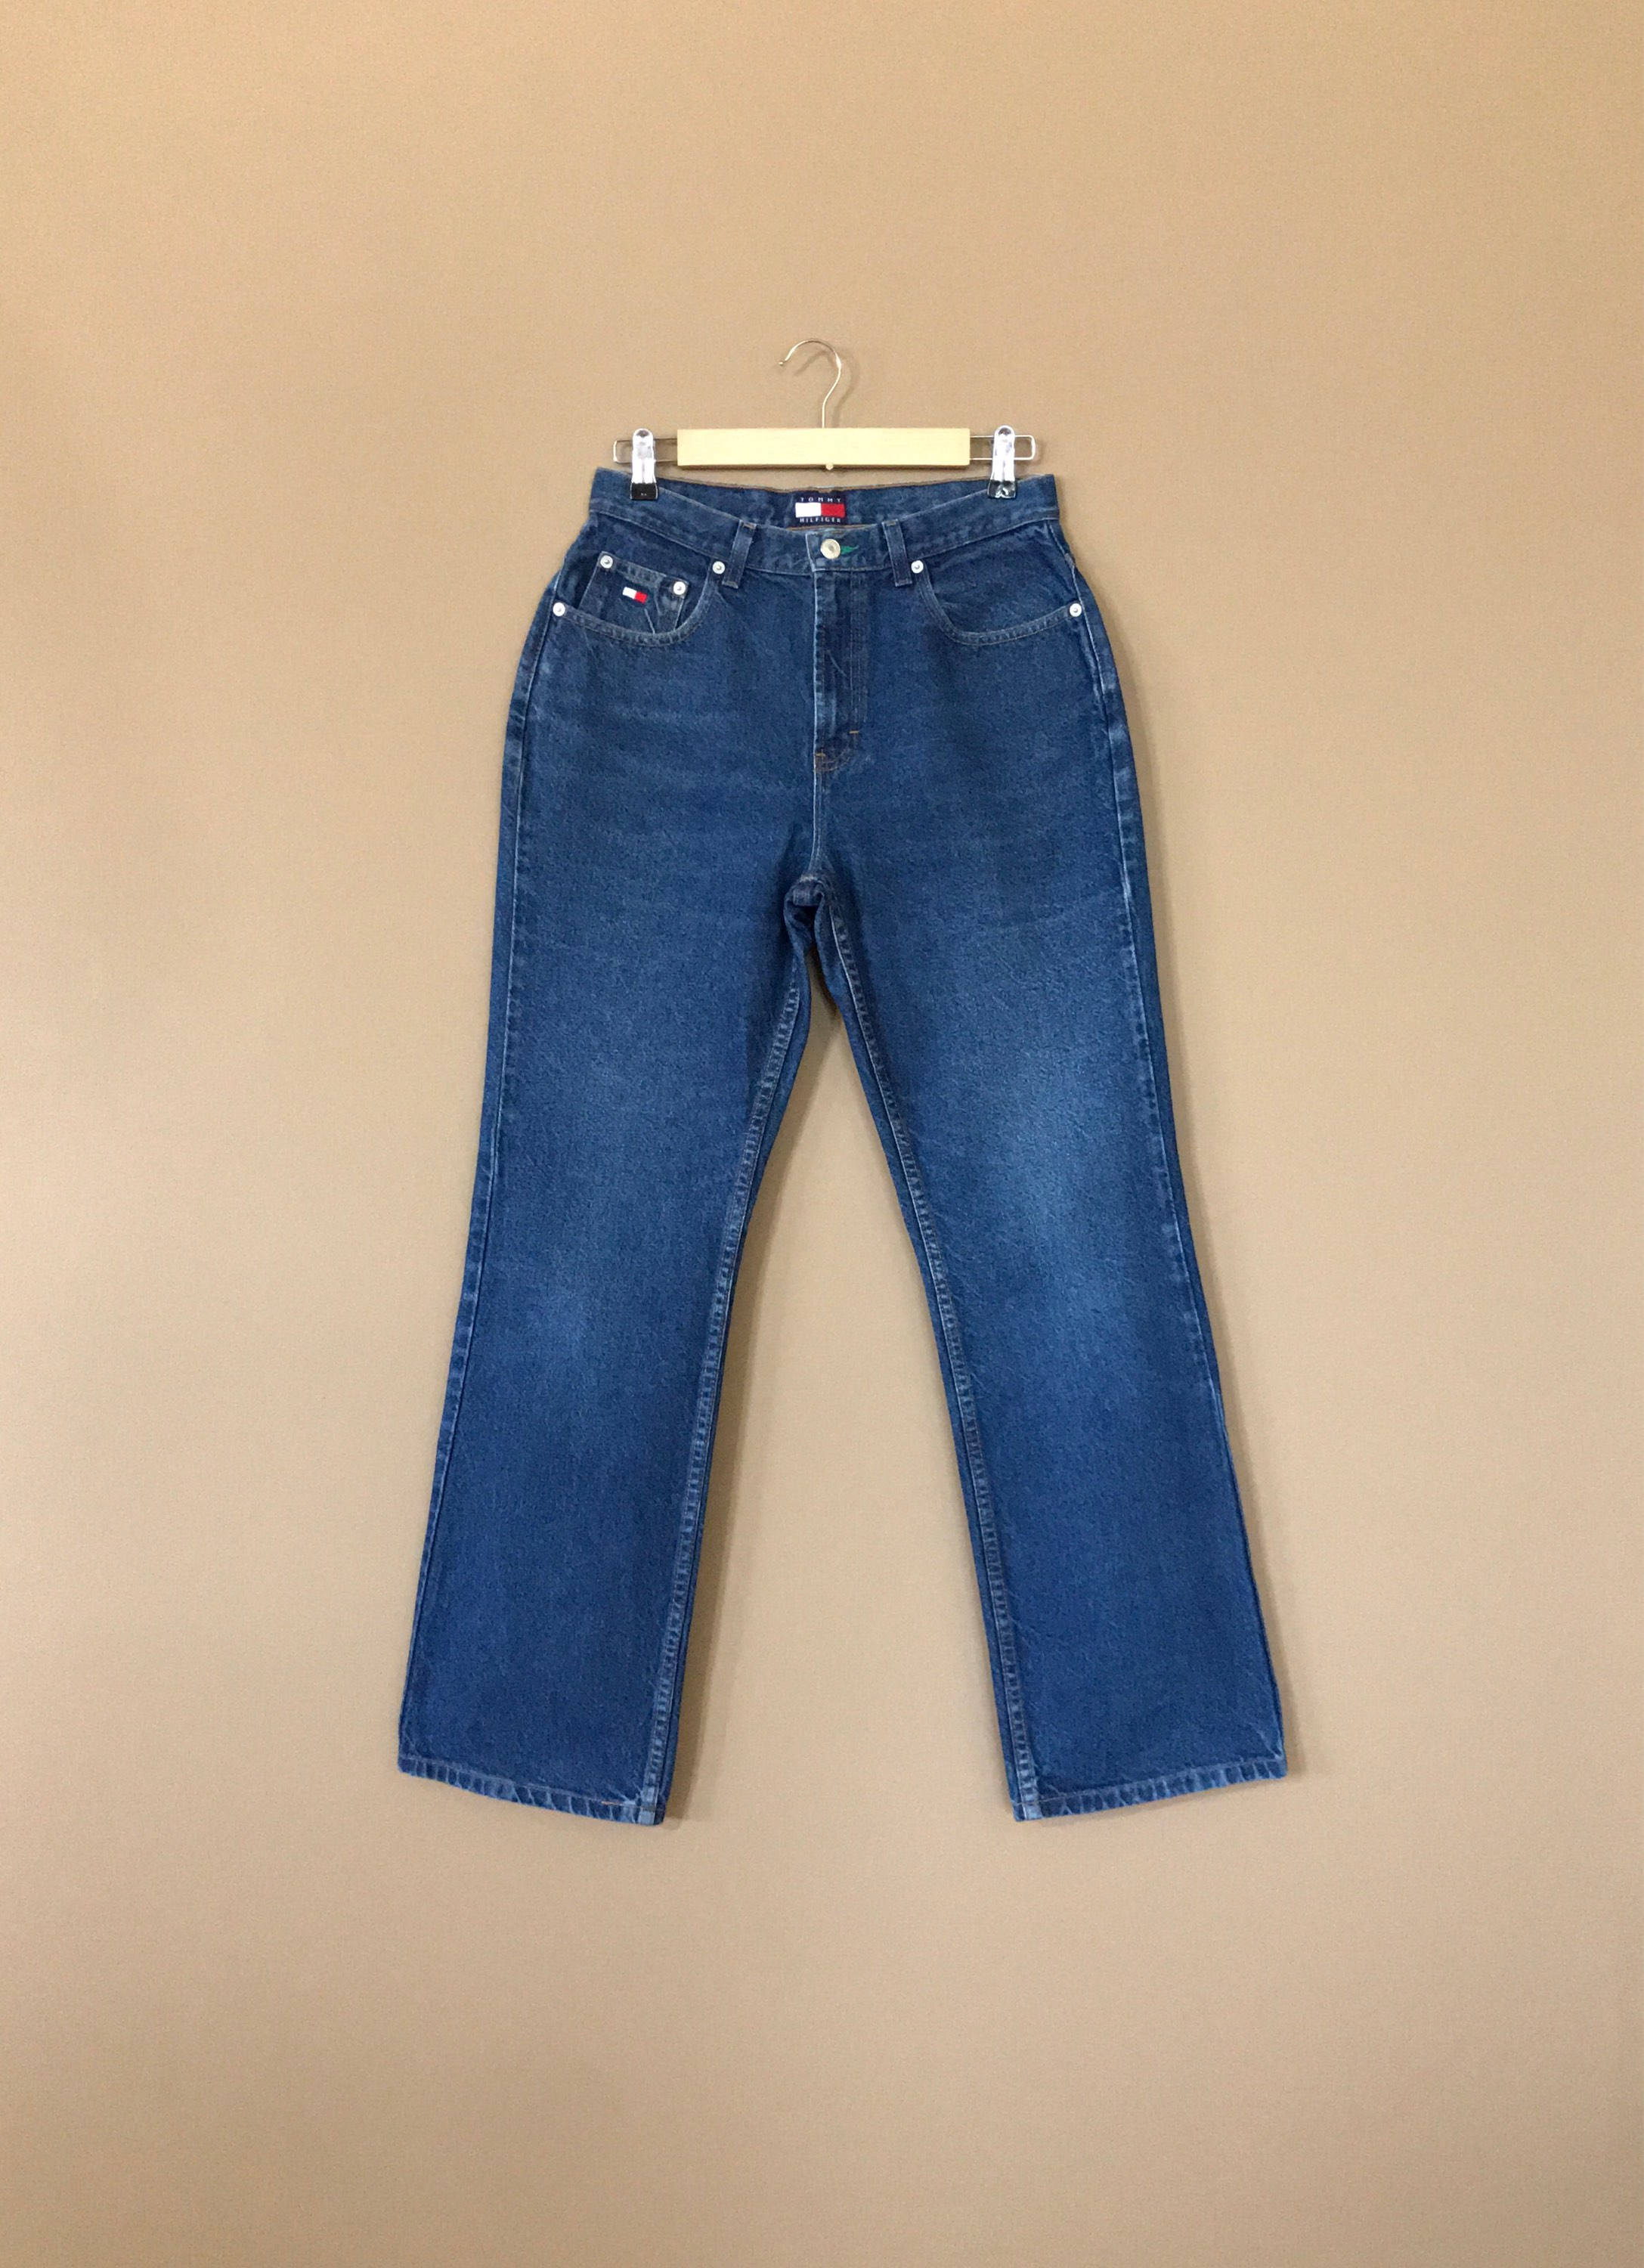 29 Tommy Jeans / High Waisted Jeans / 90s - Etsy